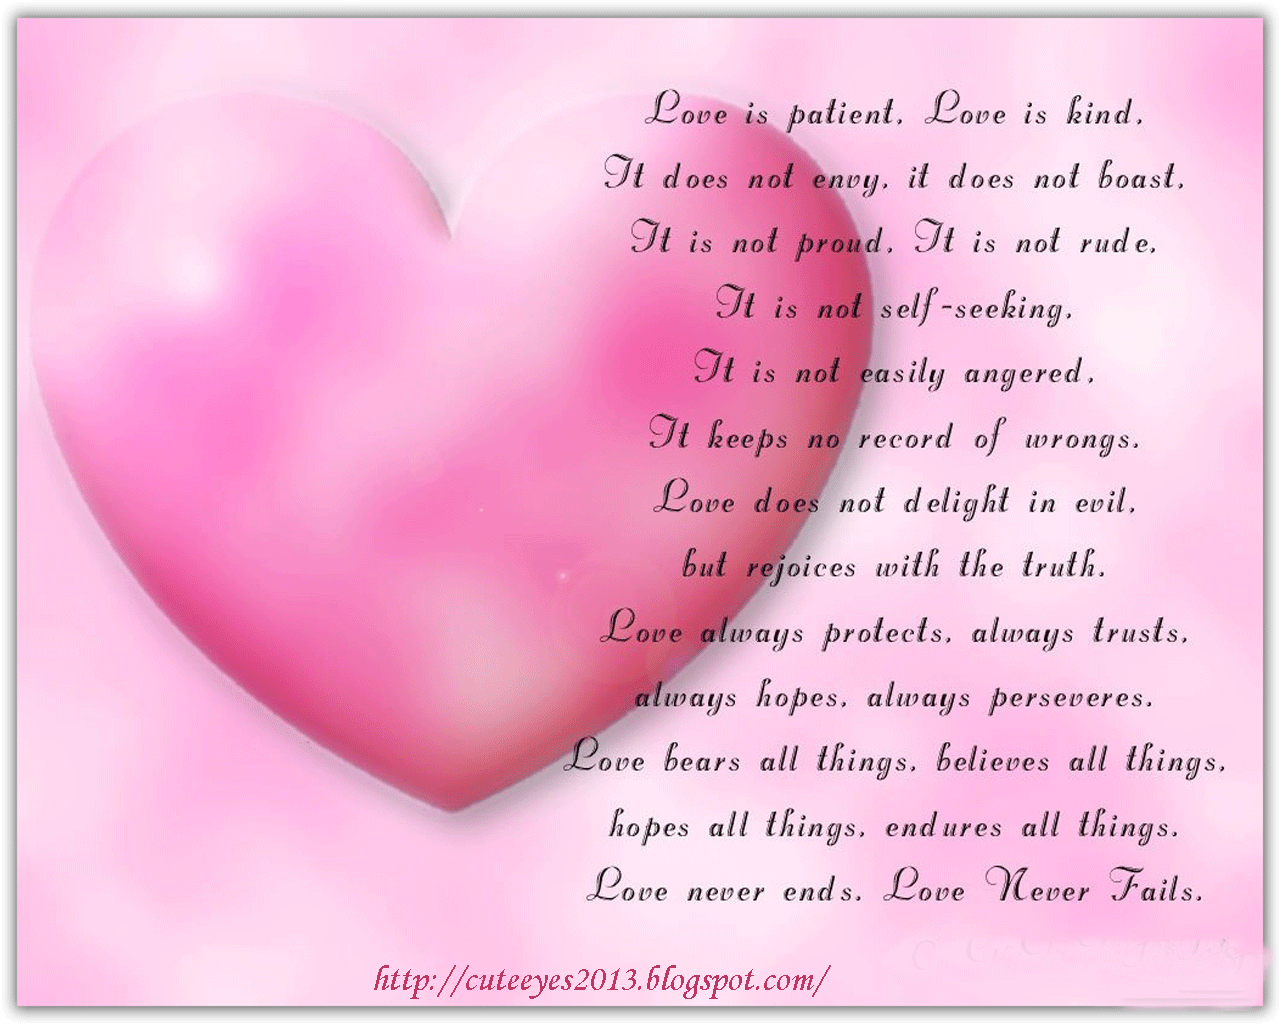 Quotes of Love